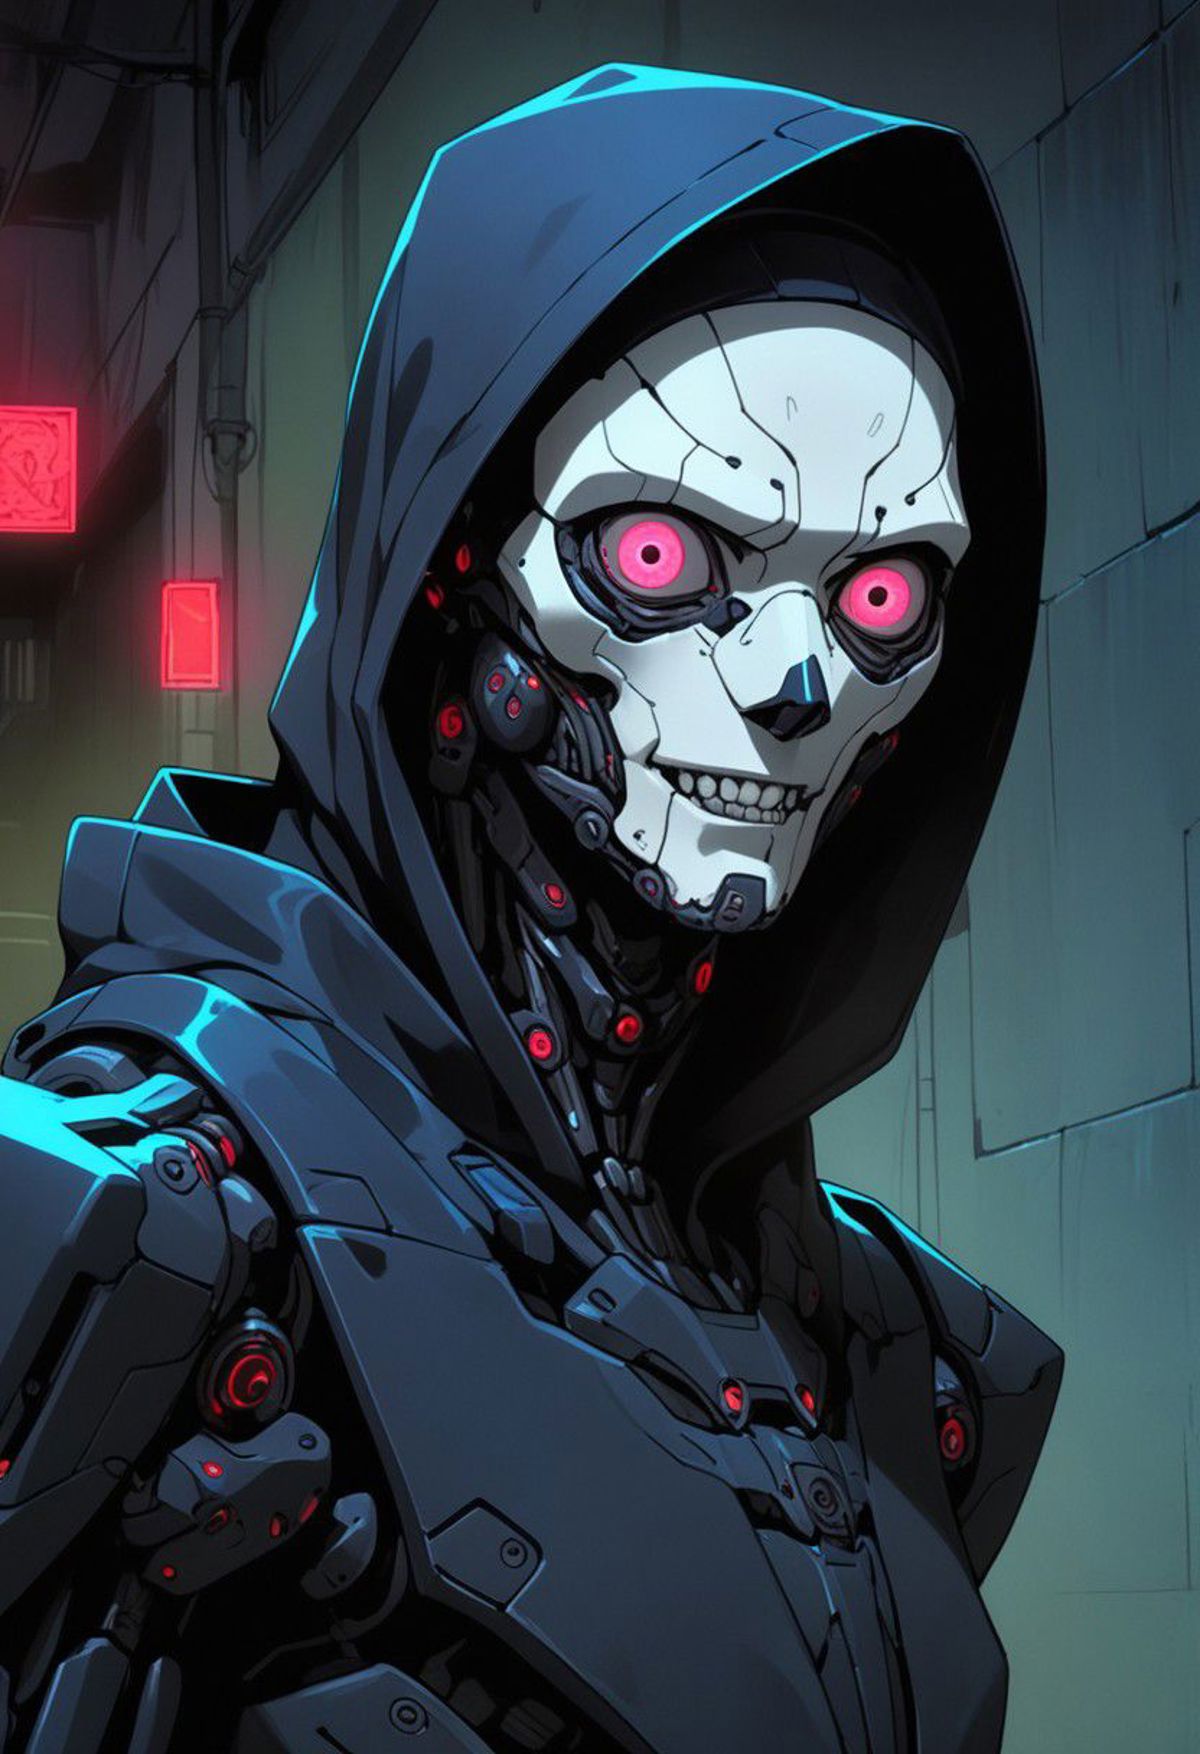 A robot with a hooded head and red eyes, wearing a black cloak.